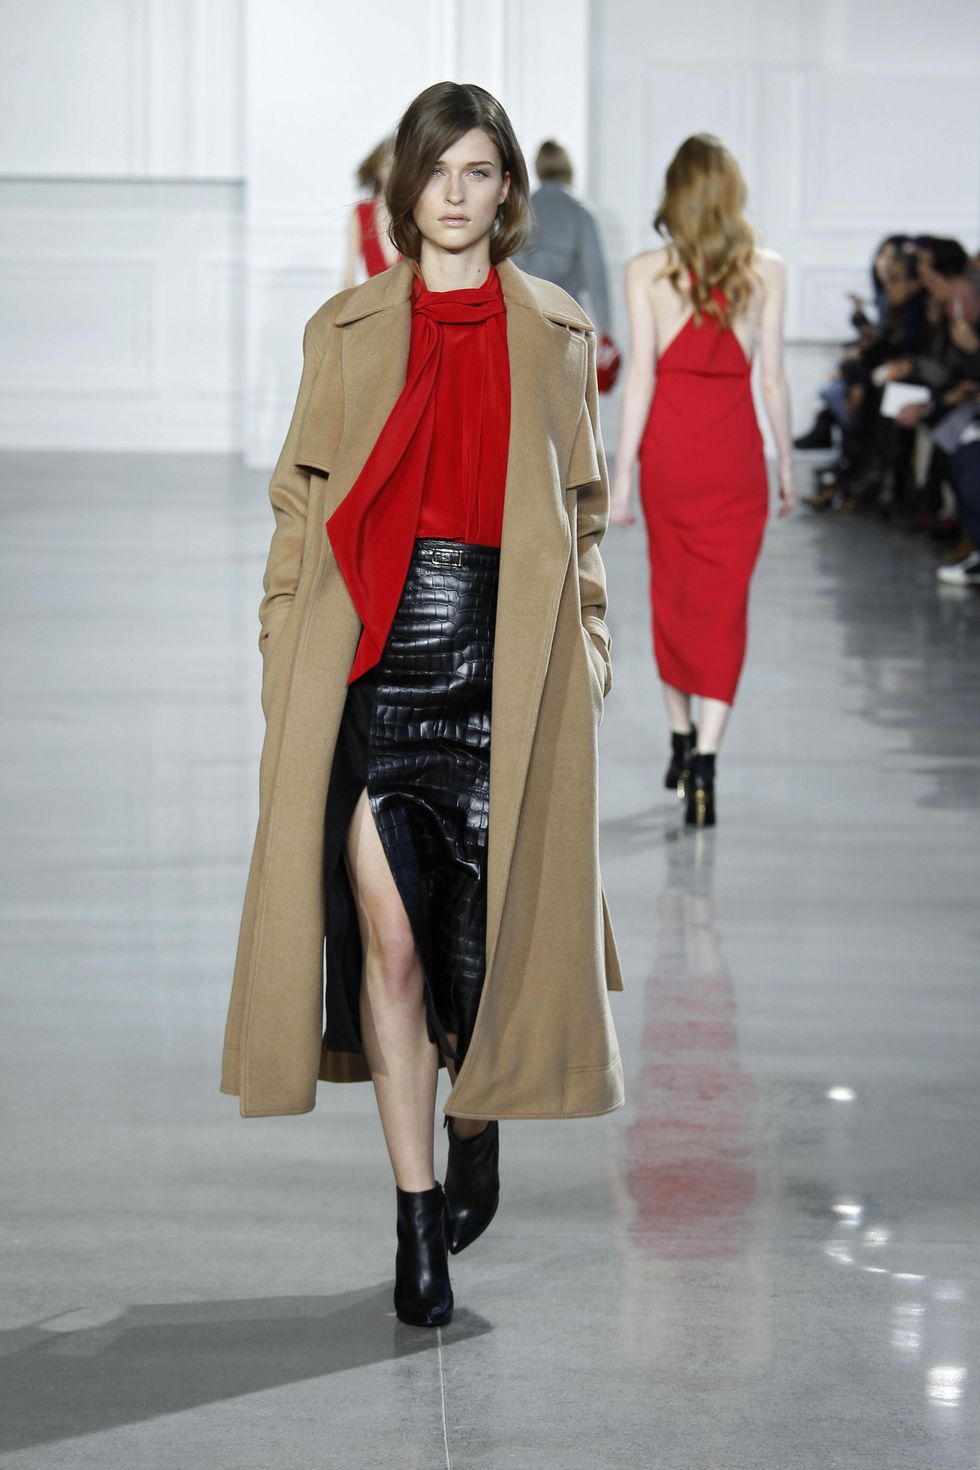 Jason Wu blouse, skirt and coat fall 2015 collection